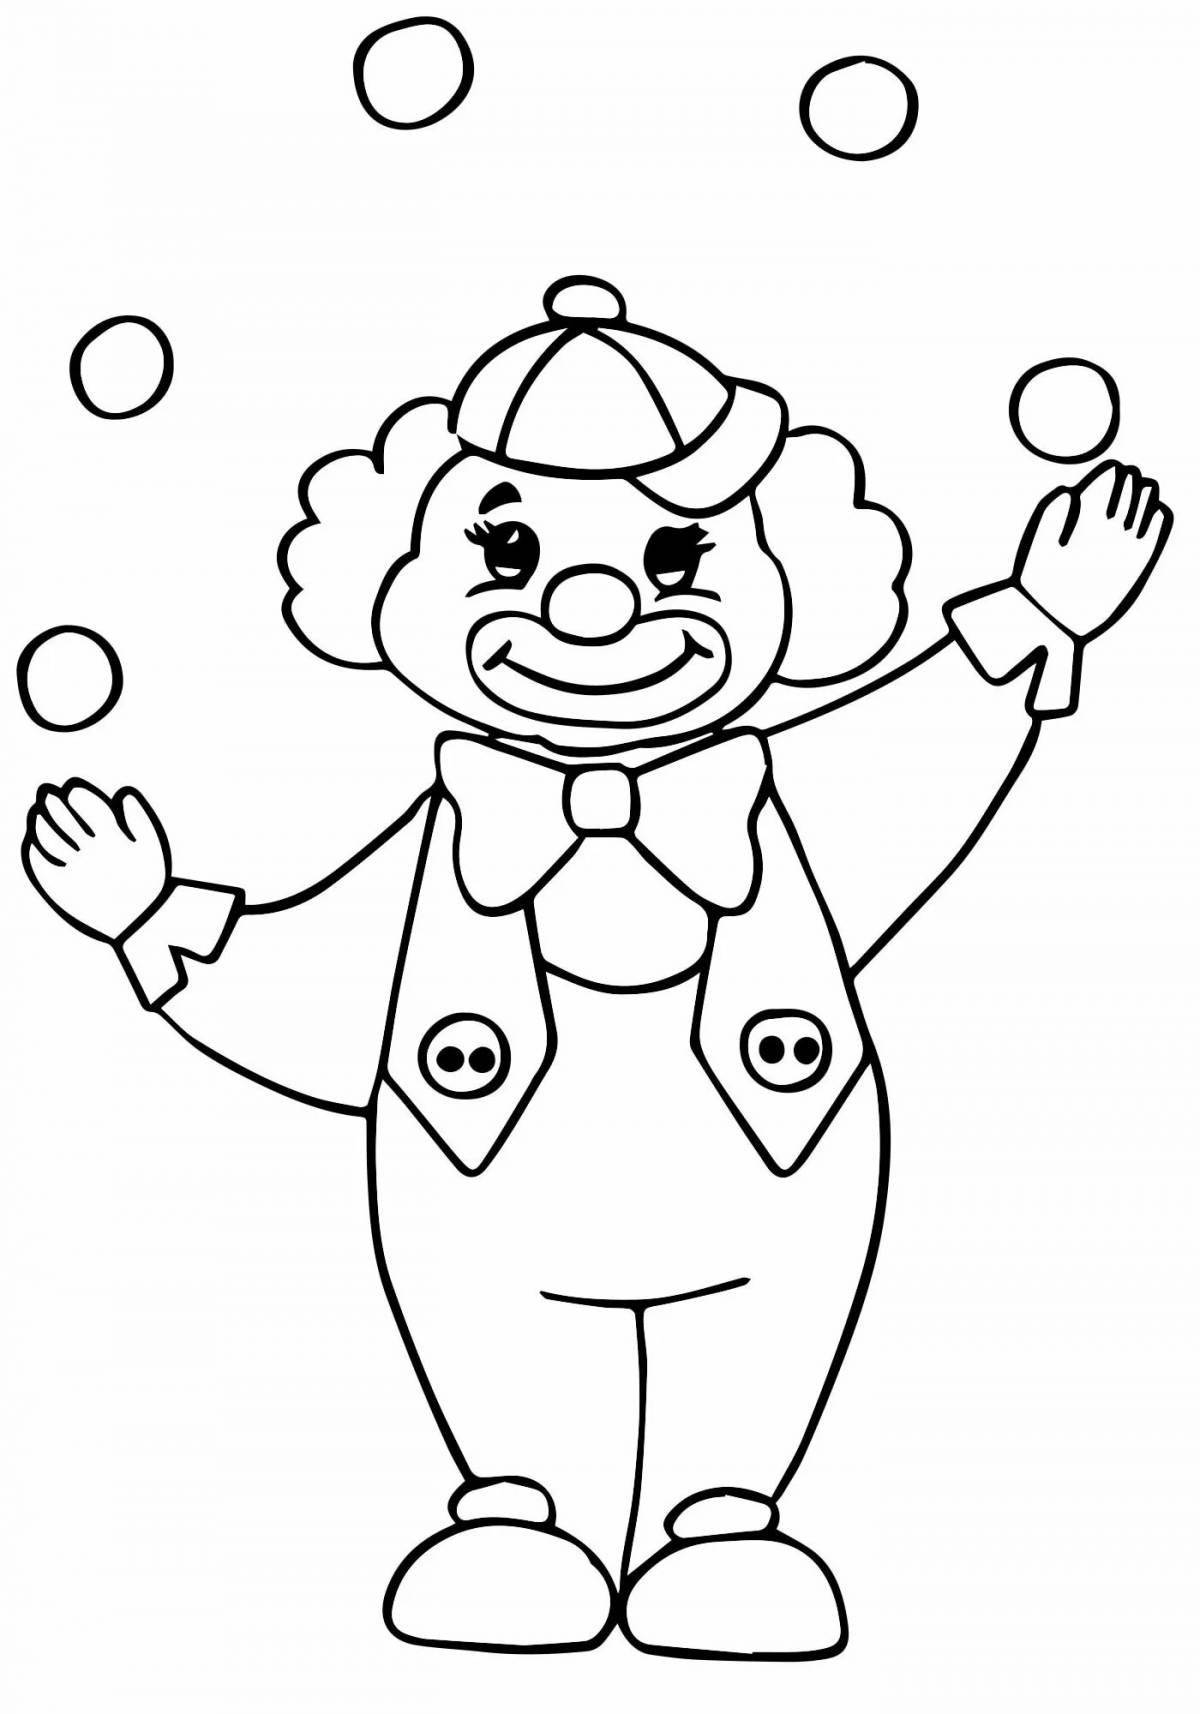 Witty funny clown coloring book for kids